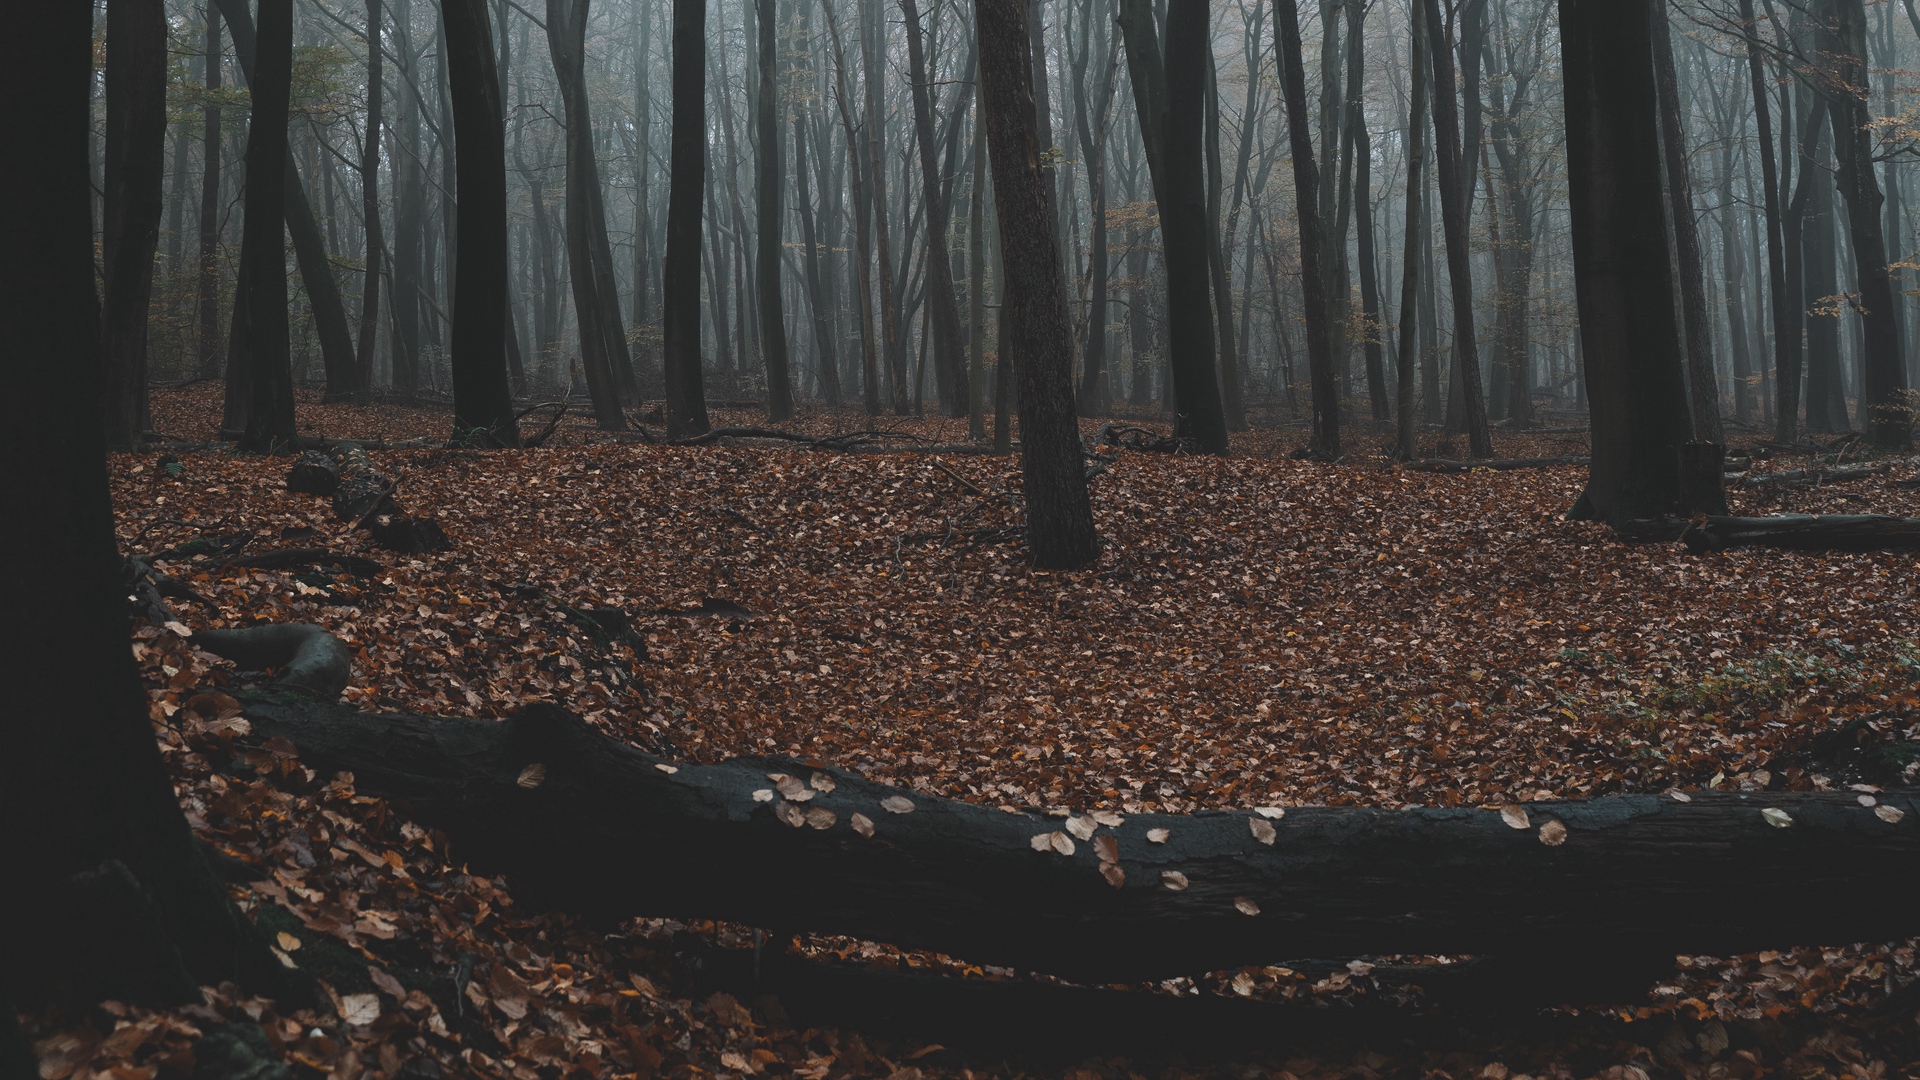 General 1920x1080 landscape forest nature trees fall mist gloomy